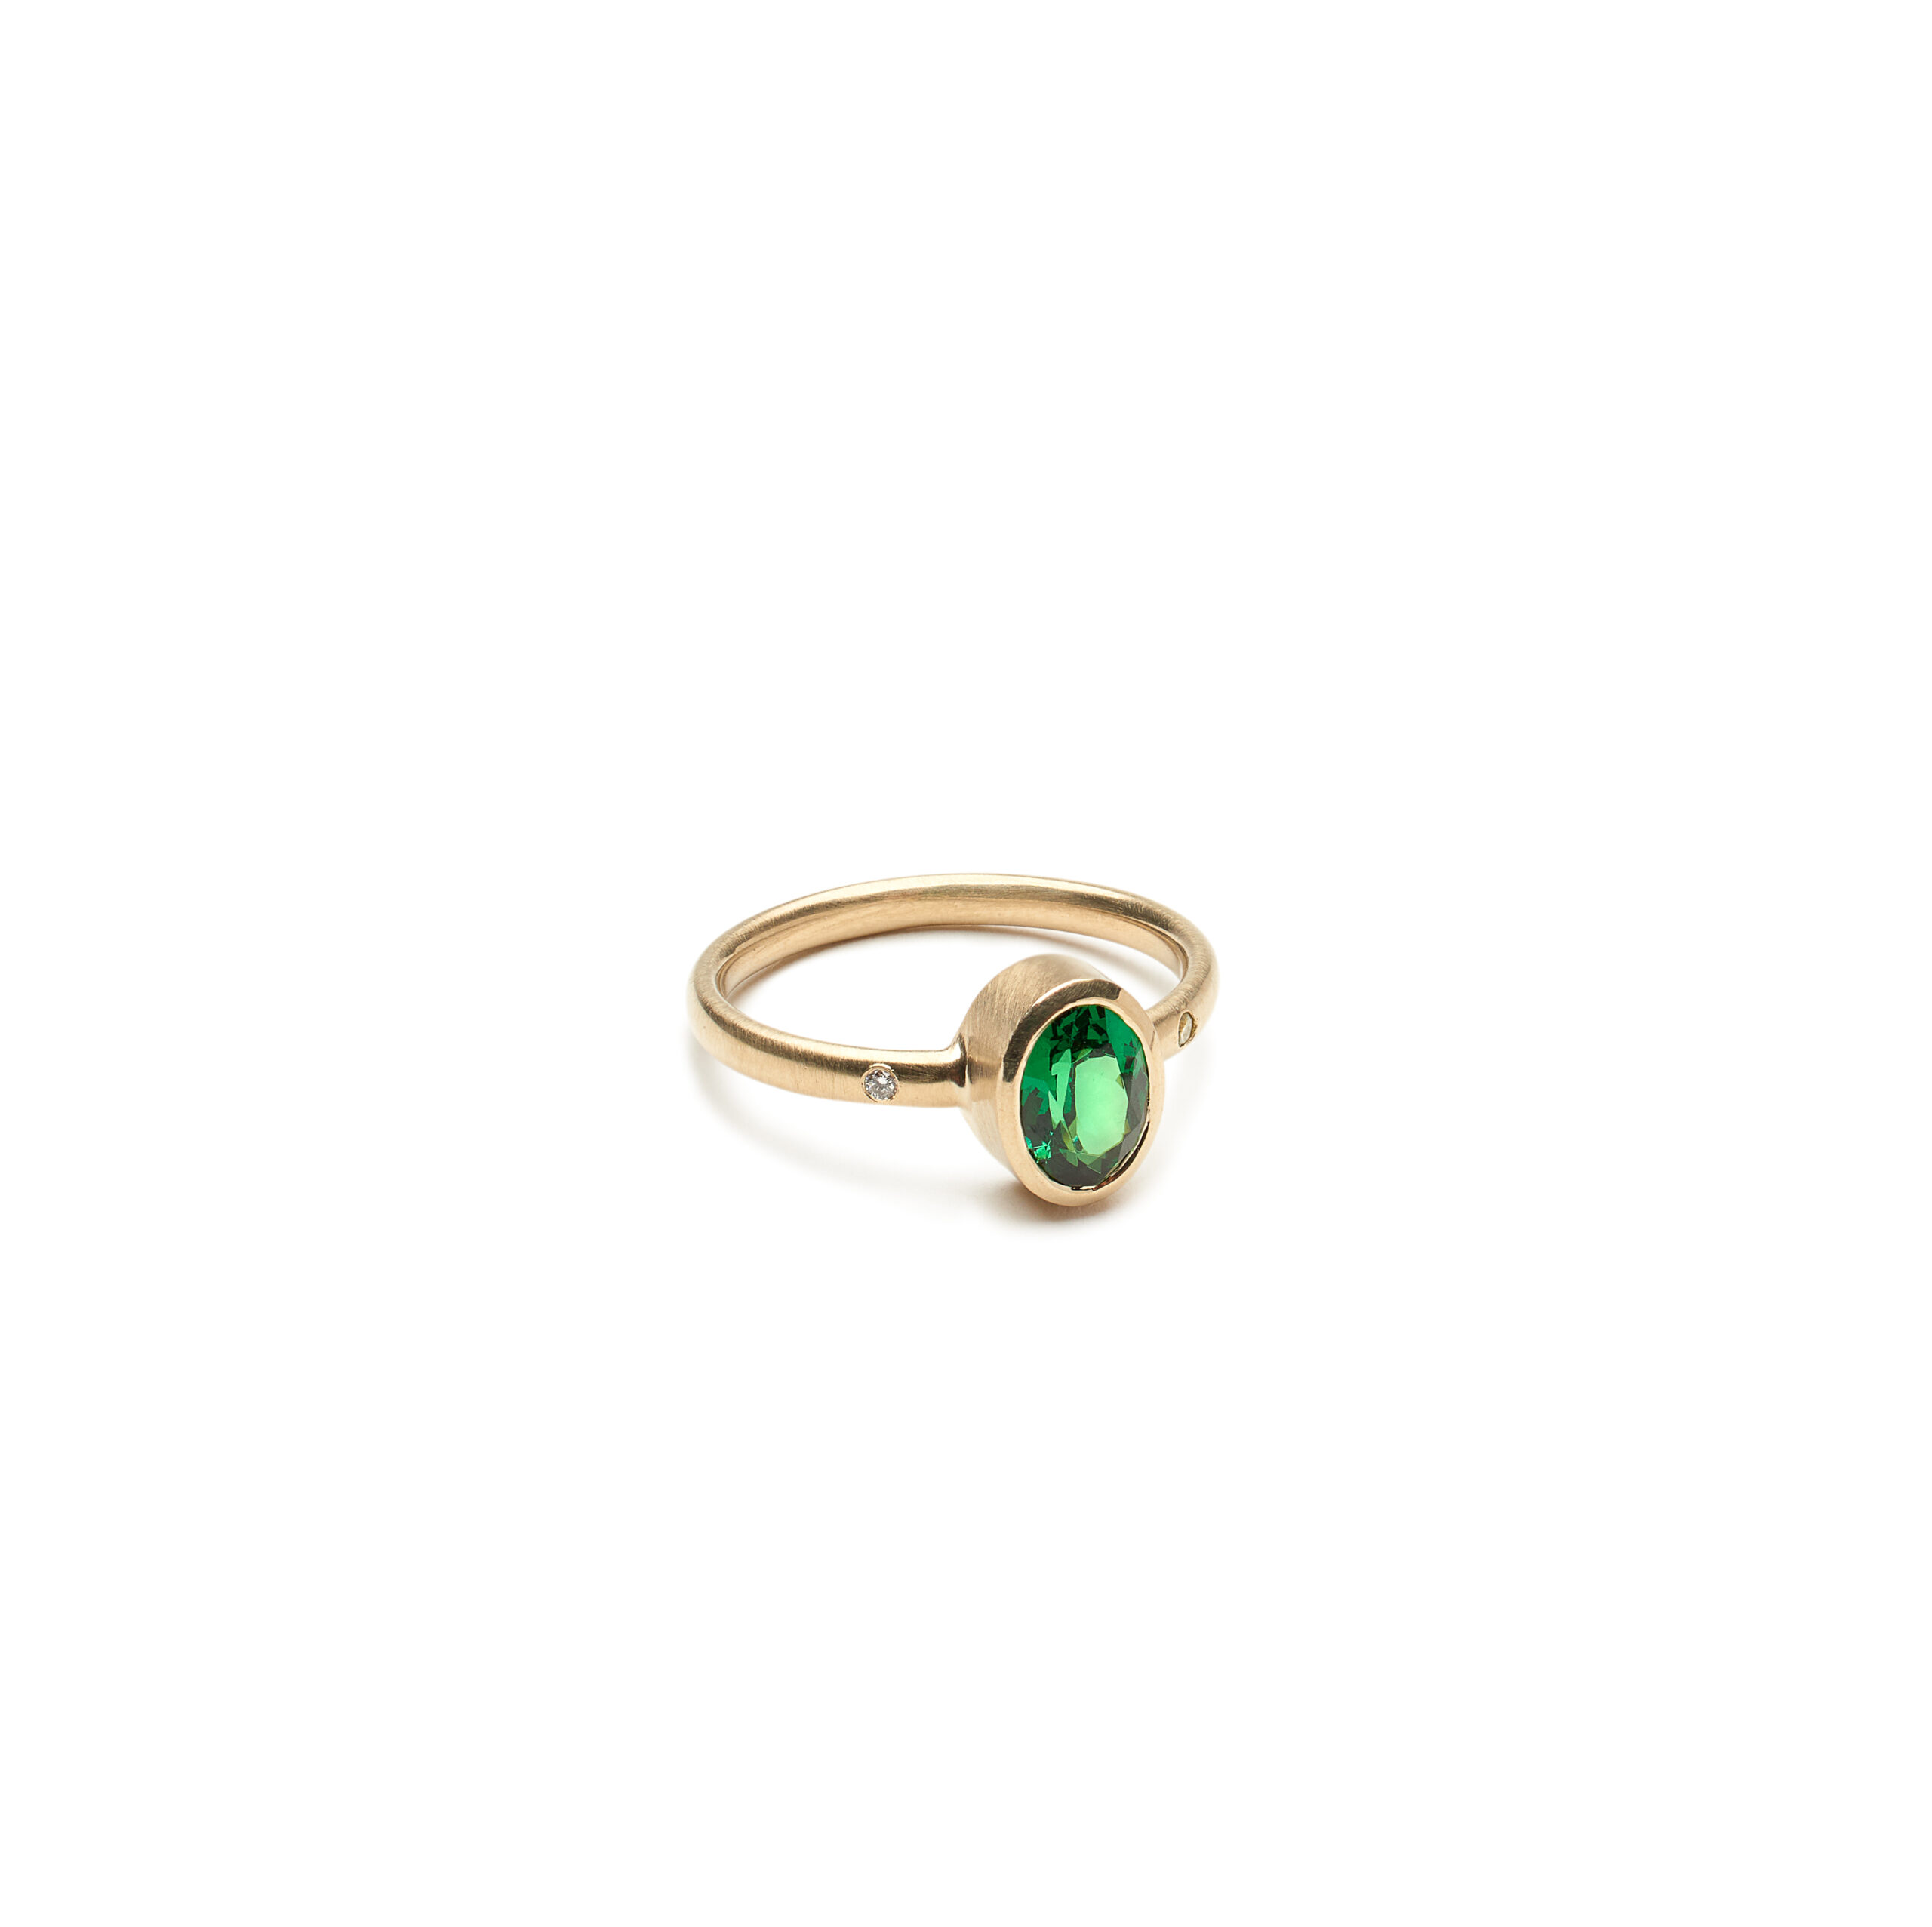 Gold ring with green gemstone